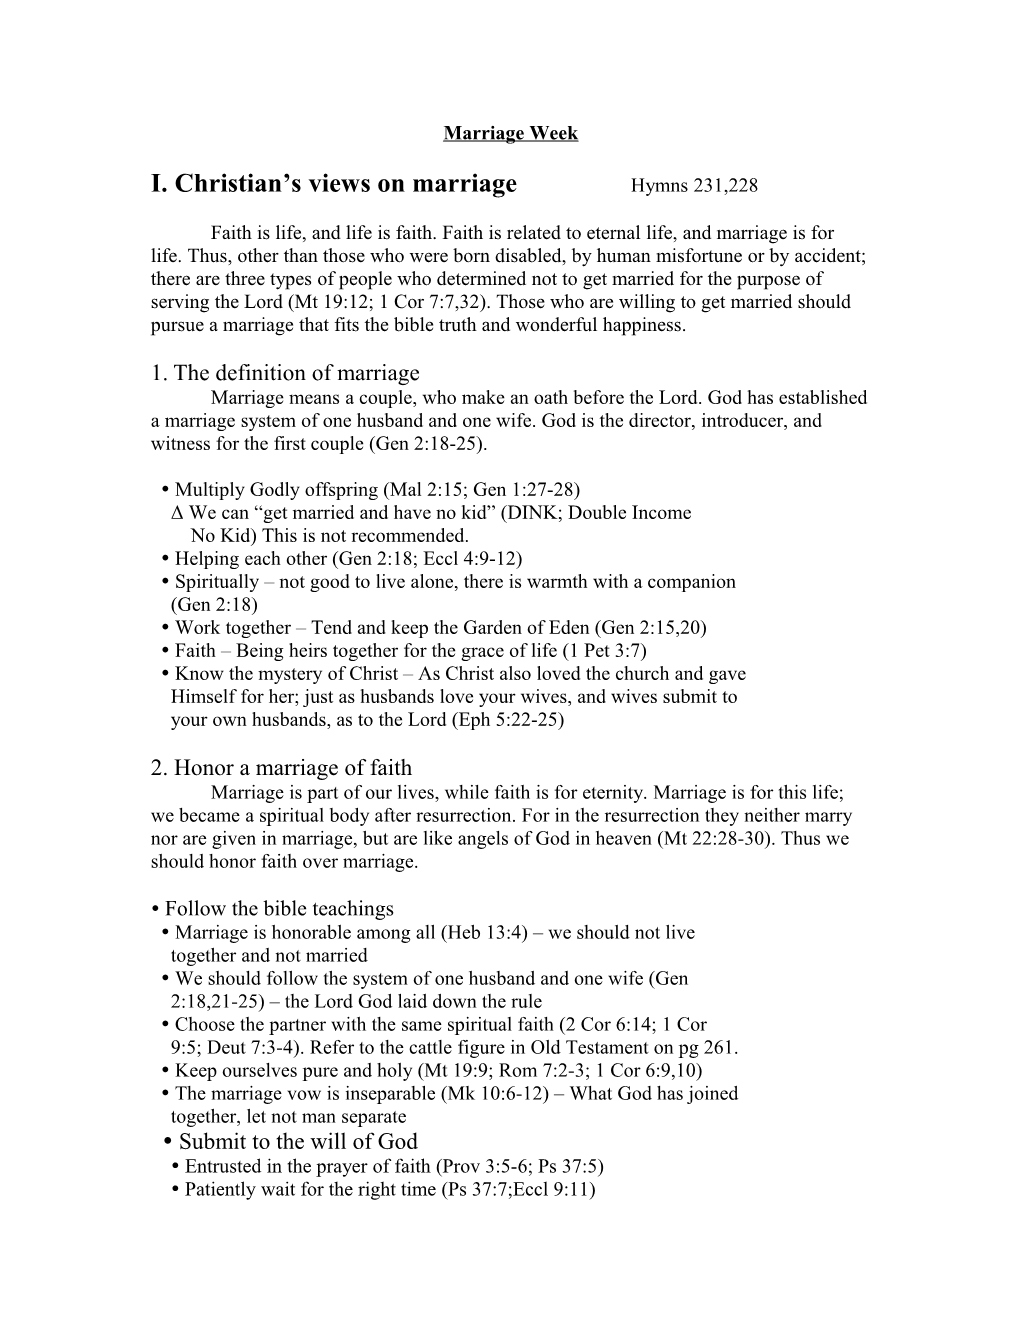 I. Christian S Views on Marriage Hymns 231,228